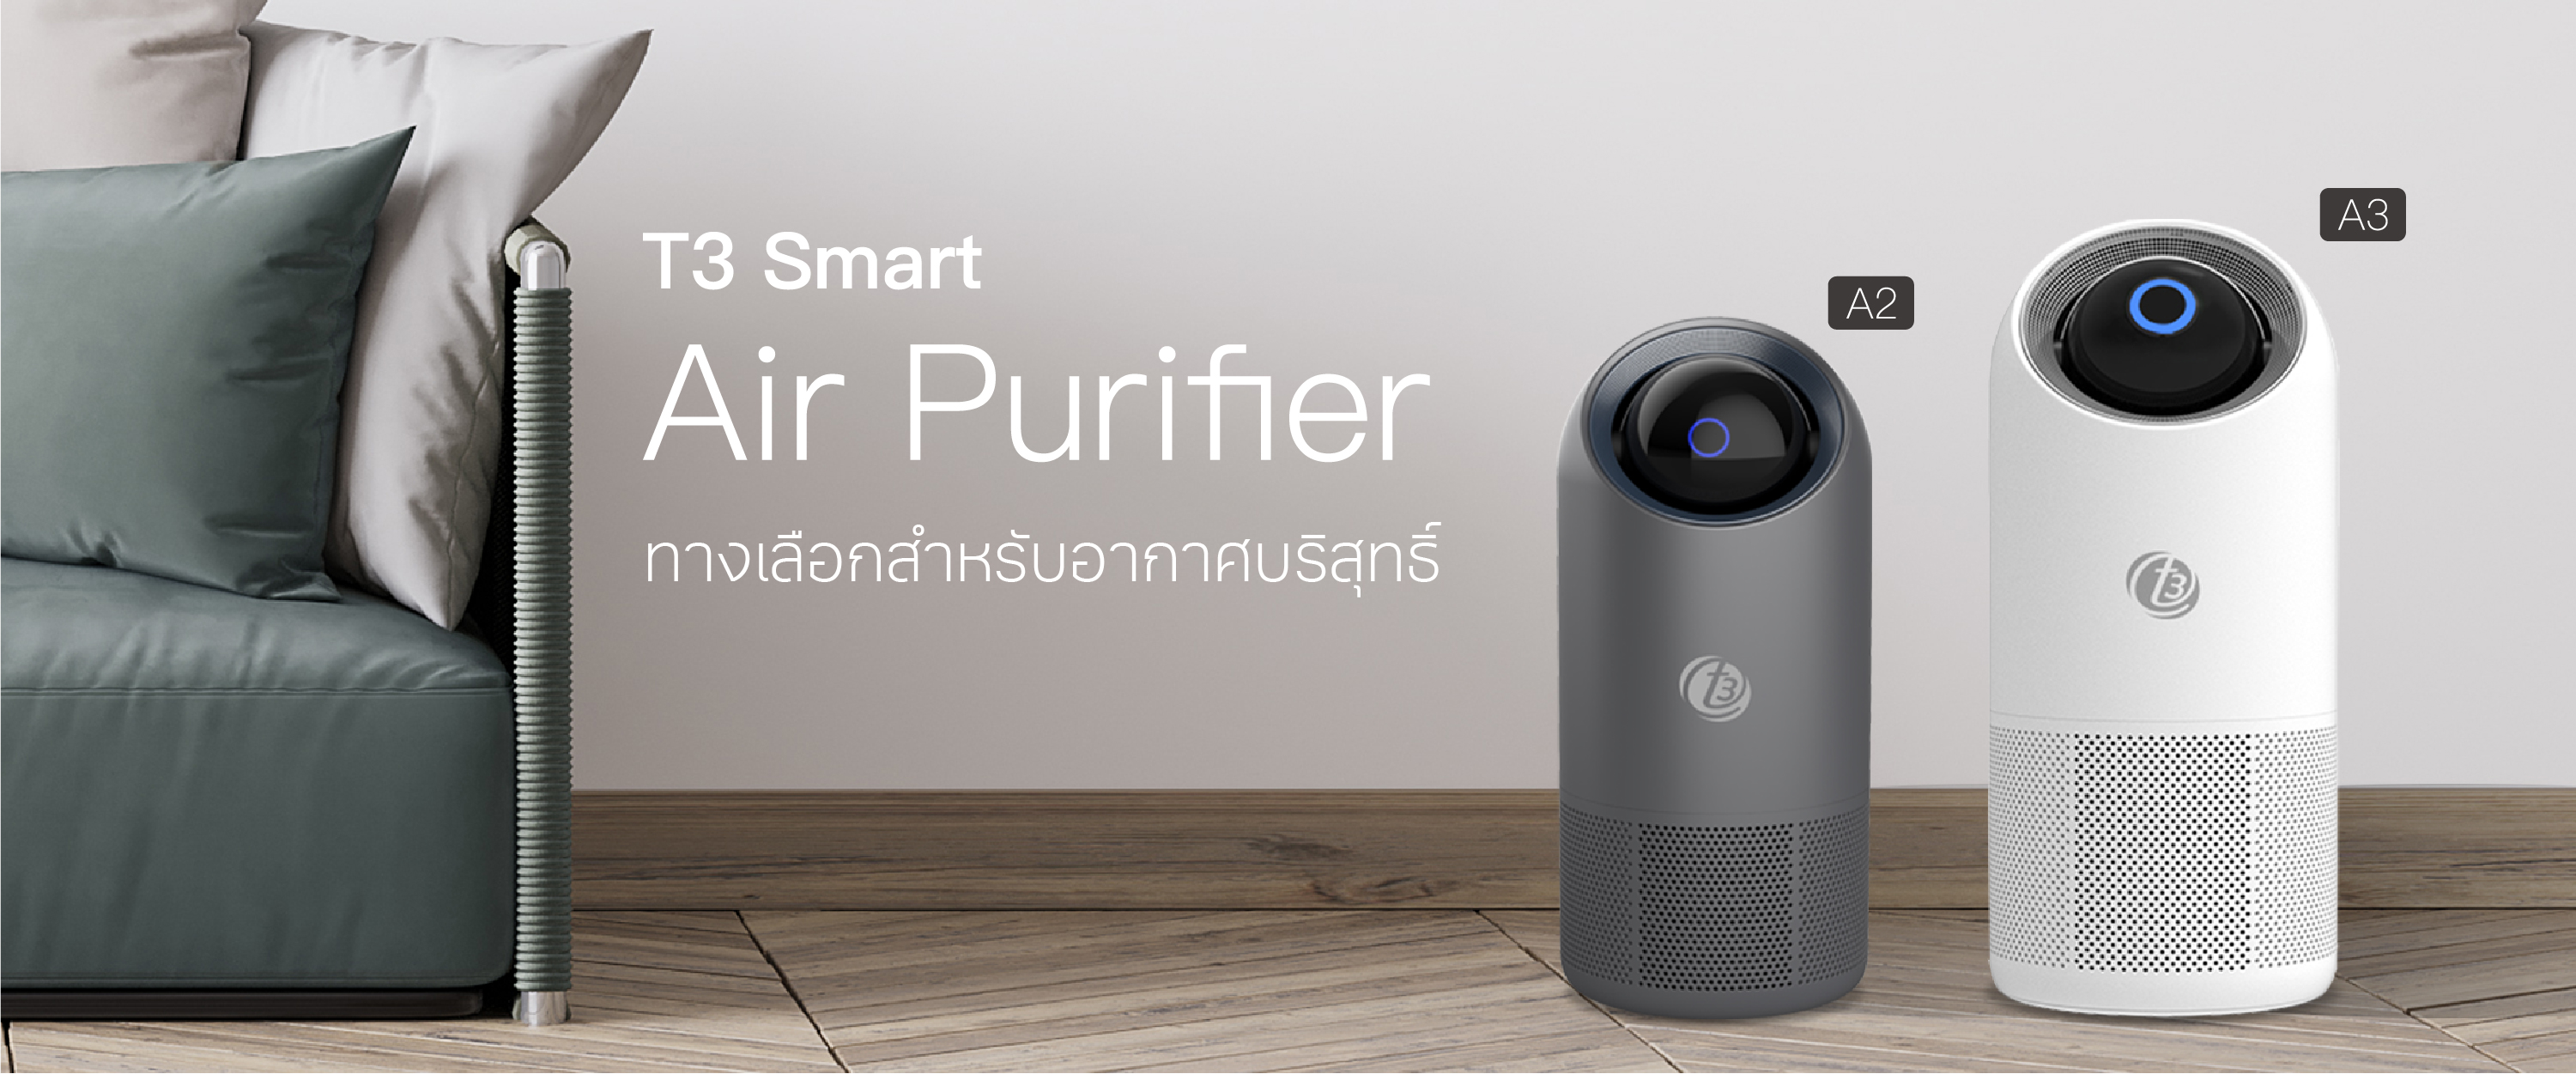 T3 Air Purifier A2 and A3